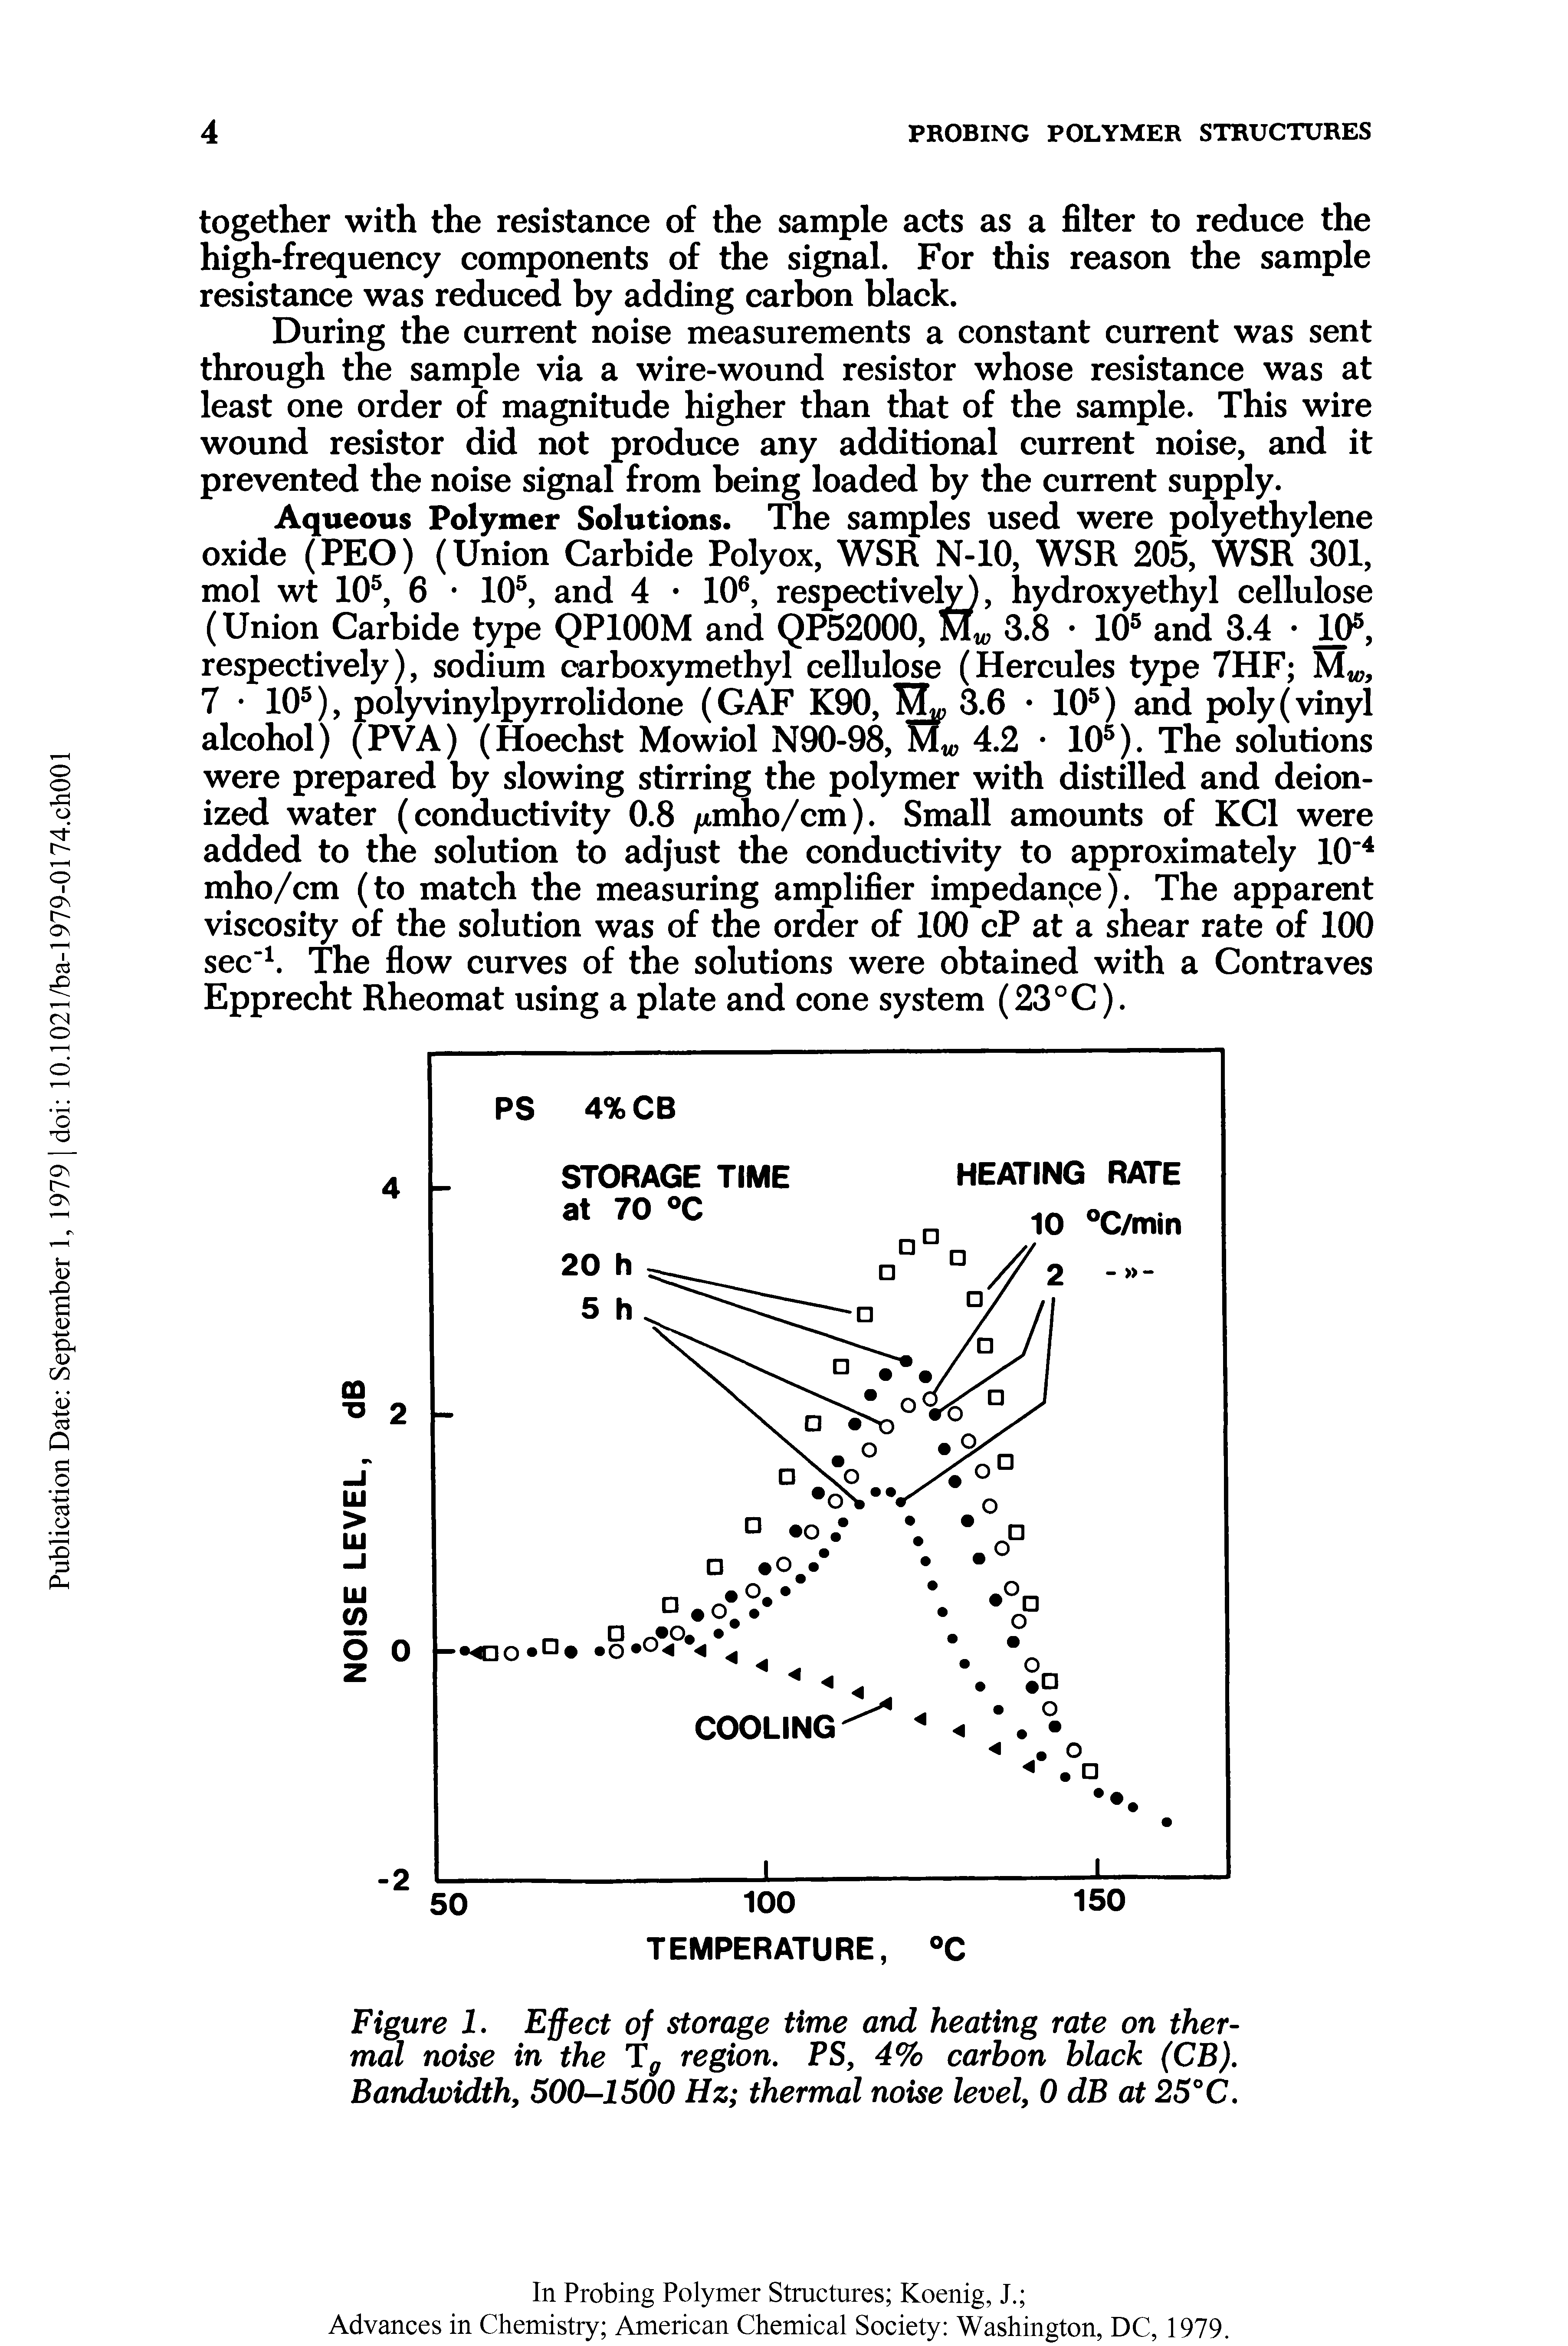 Figure 1. Effect of storage time and heating rate on thermal noise in the Tg region. PS, 4% carbon black (CB). Bandwidth, 500-1500 Hz thermal noise level, 0 dB at 25°C.